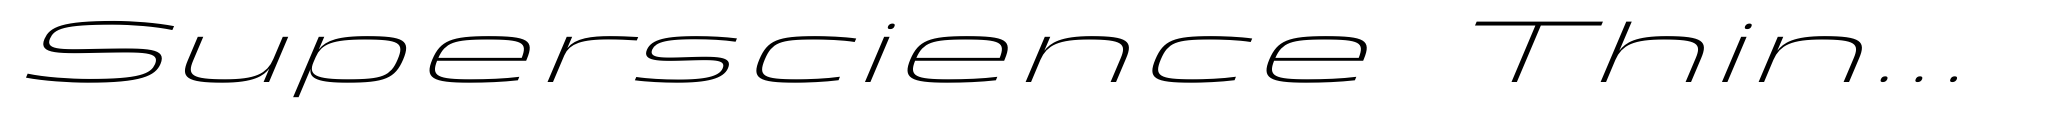 Superscience Thin Ultra Expanded Italic image